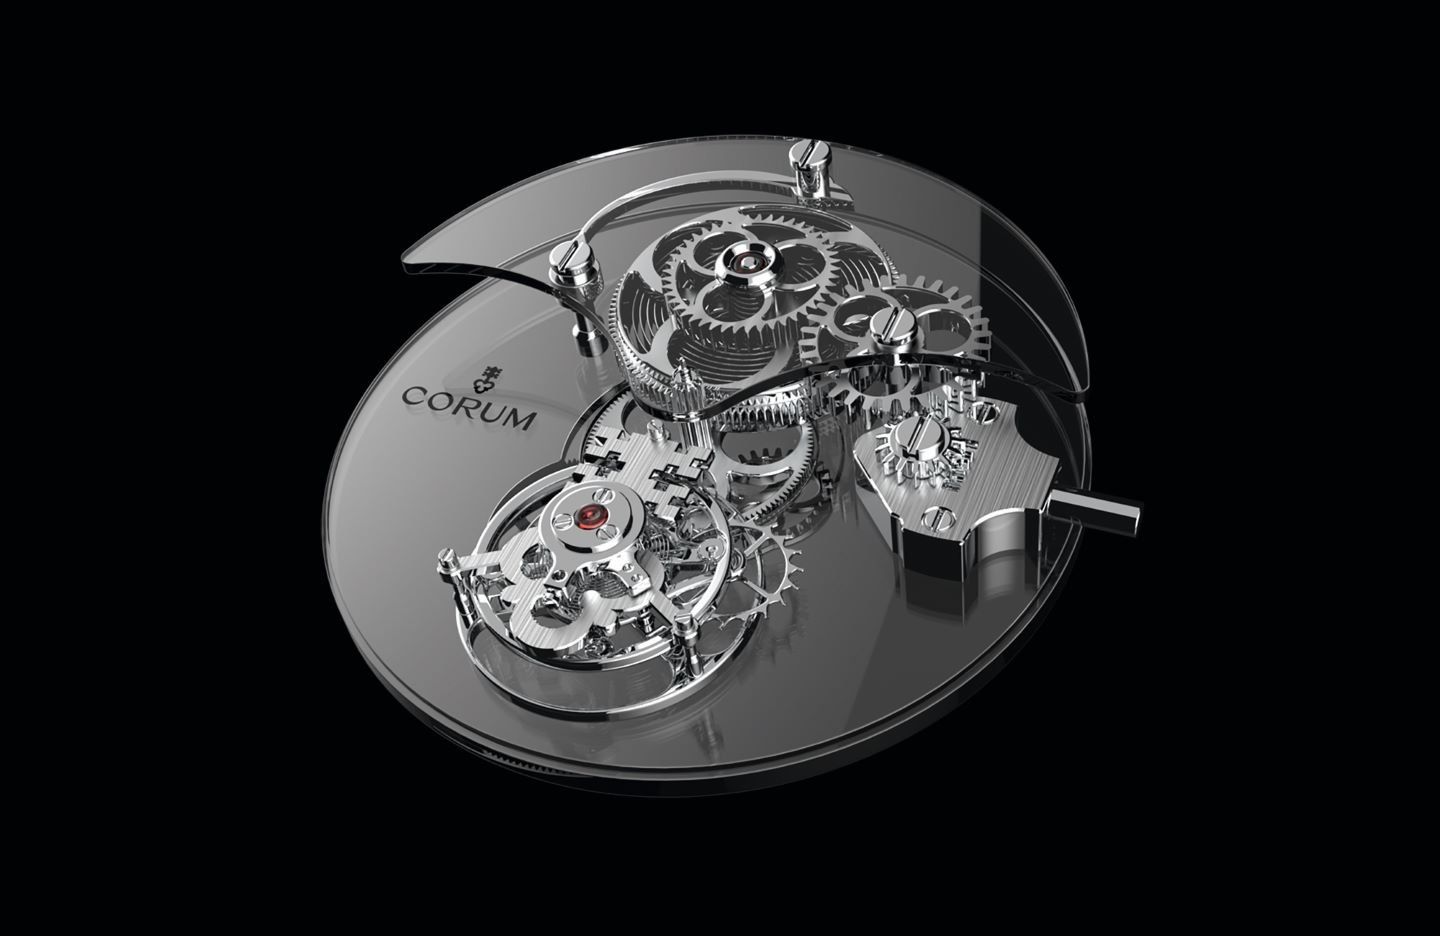 The mesmerizing flying tourbillon movement that graces the front face of the watch